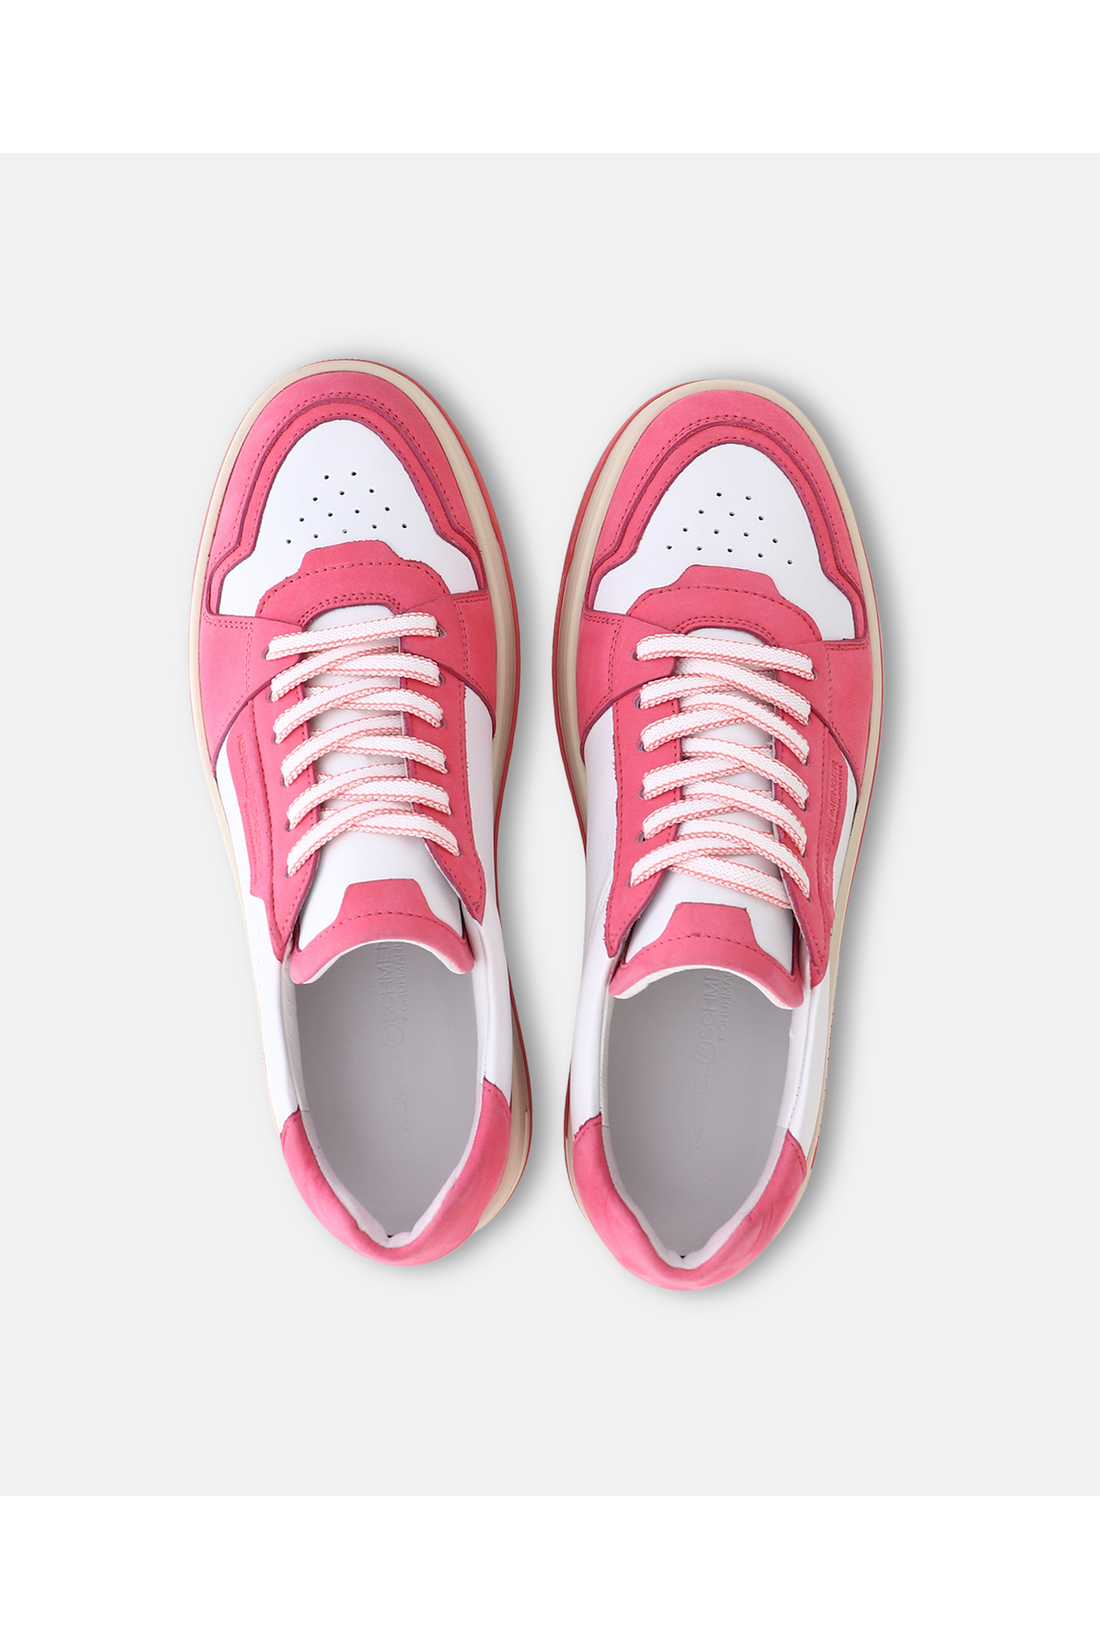 Kennel-Schmenger-OUTLET-SALE-DRIFT-Sneakers-ARCHIVE-COLLECTION-4.png